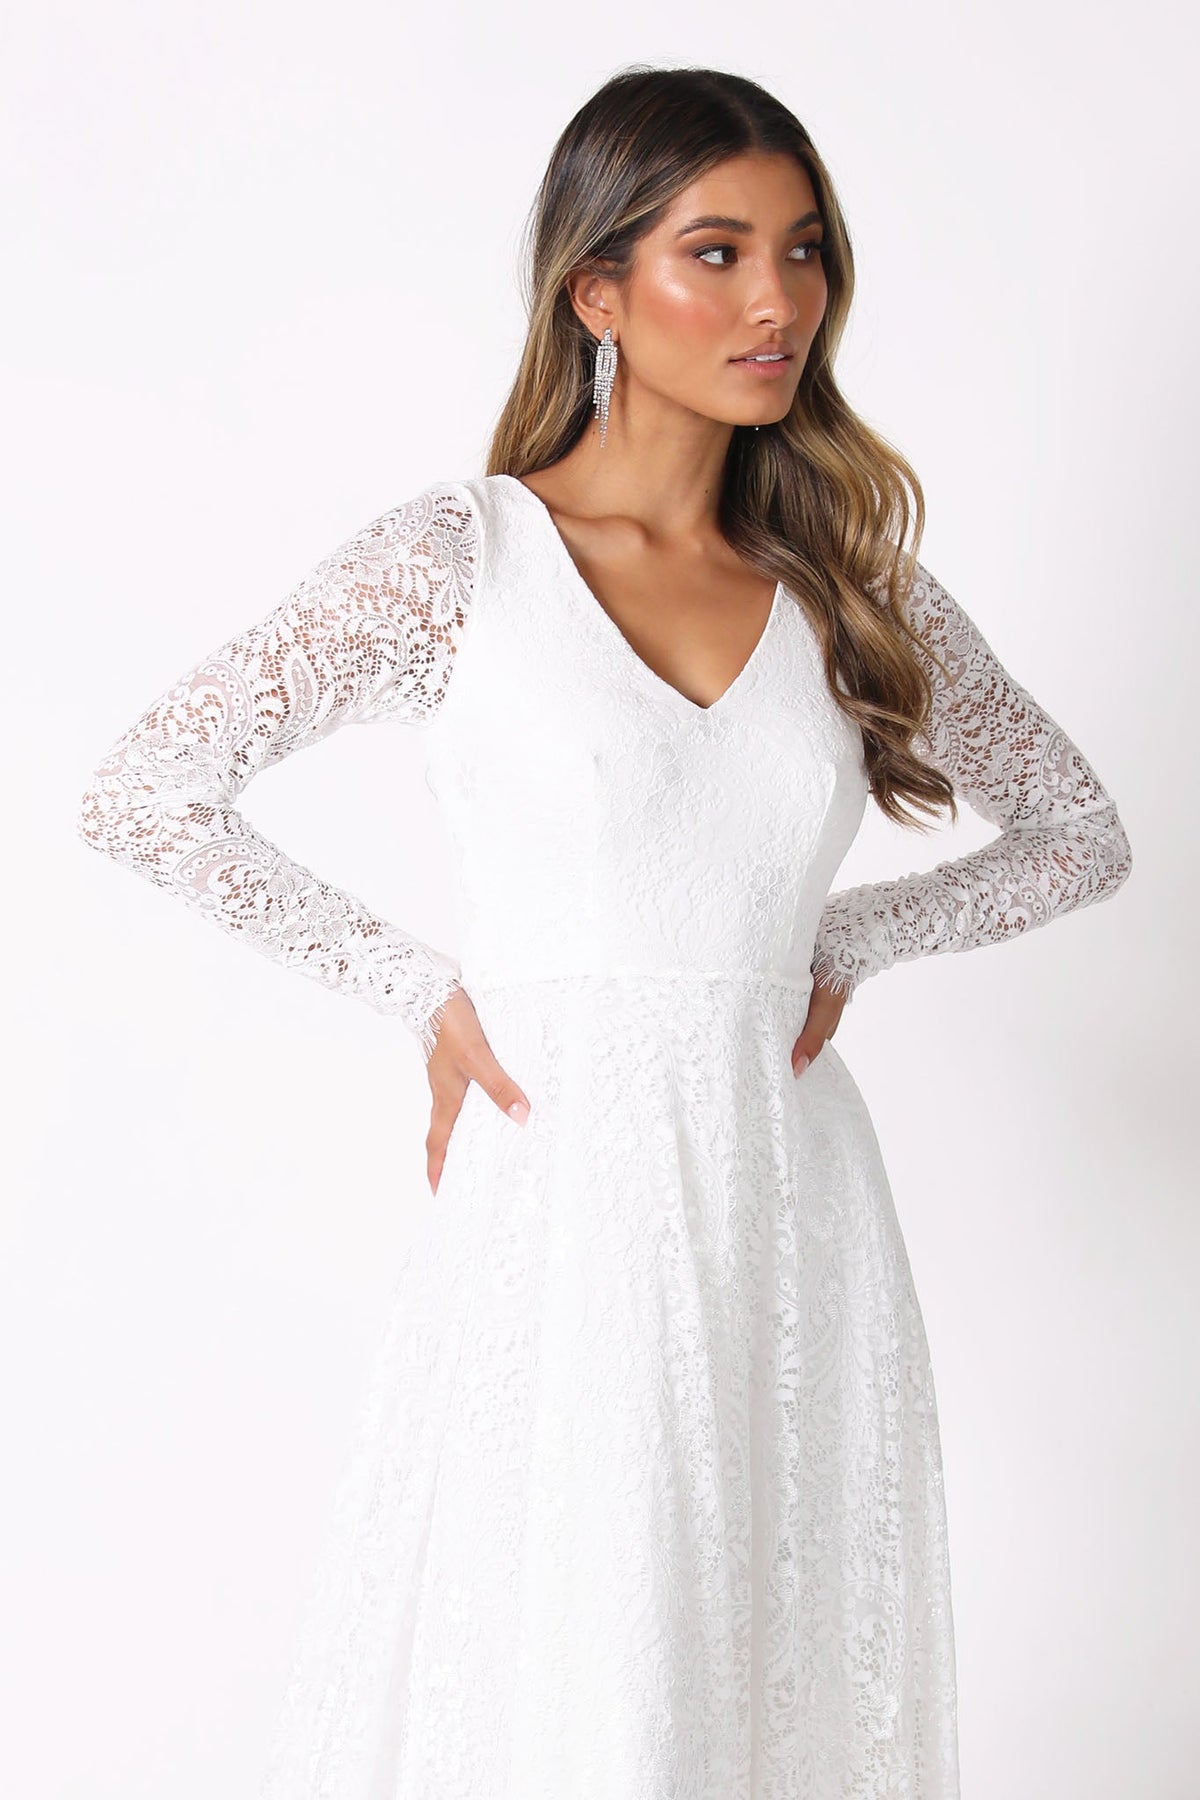 White Long Sleeve Lace Wedding Gown with V-Neck, Sheer Lace Fitted Sleeves, A-Line Skirt and Sweep Train